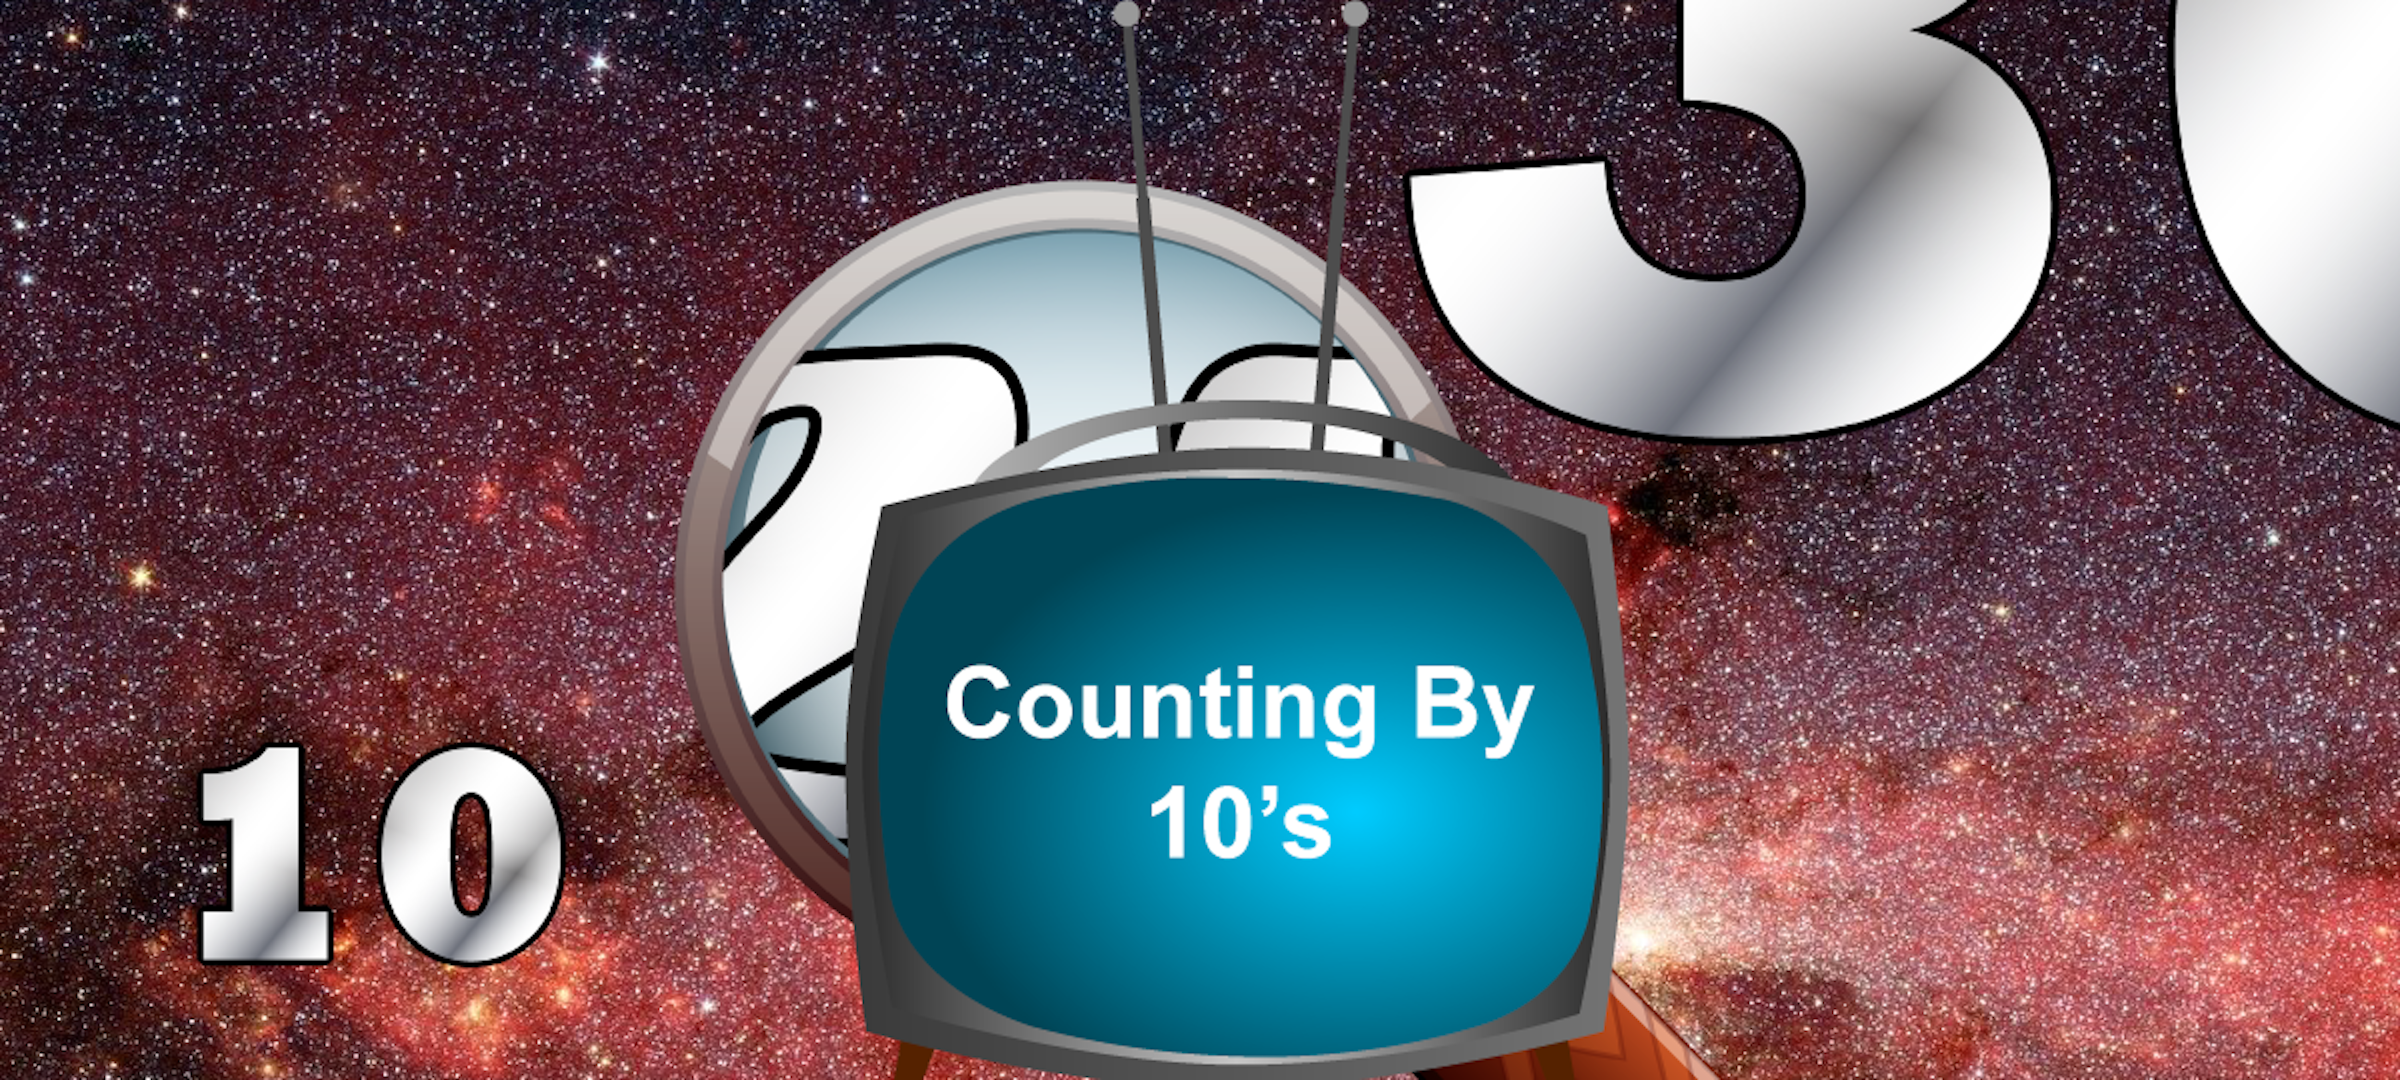 Closed Captioned Video: Place Value--Counting by 10's